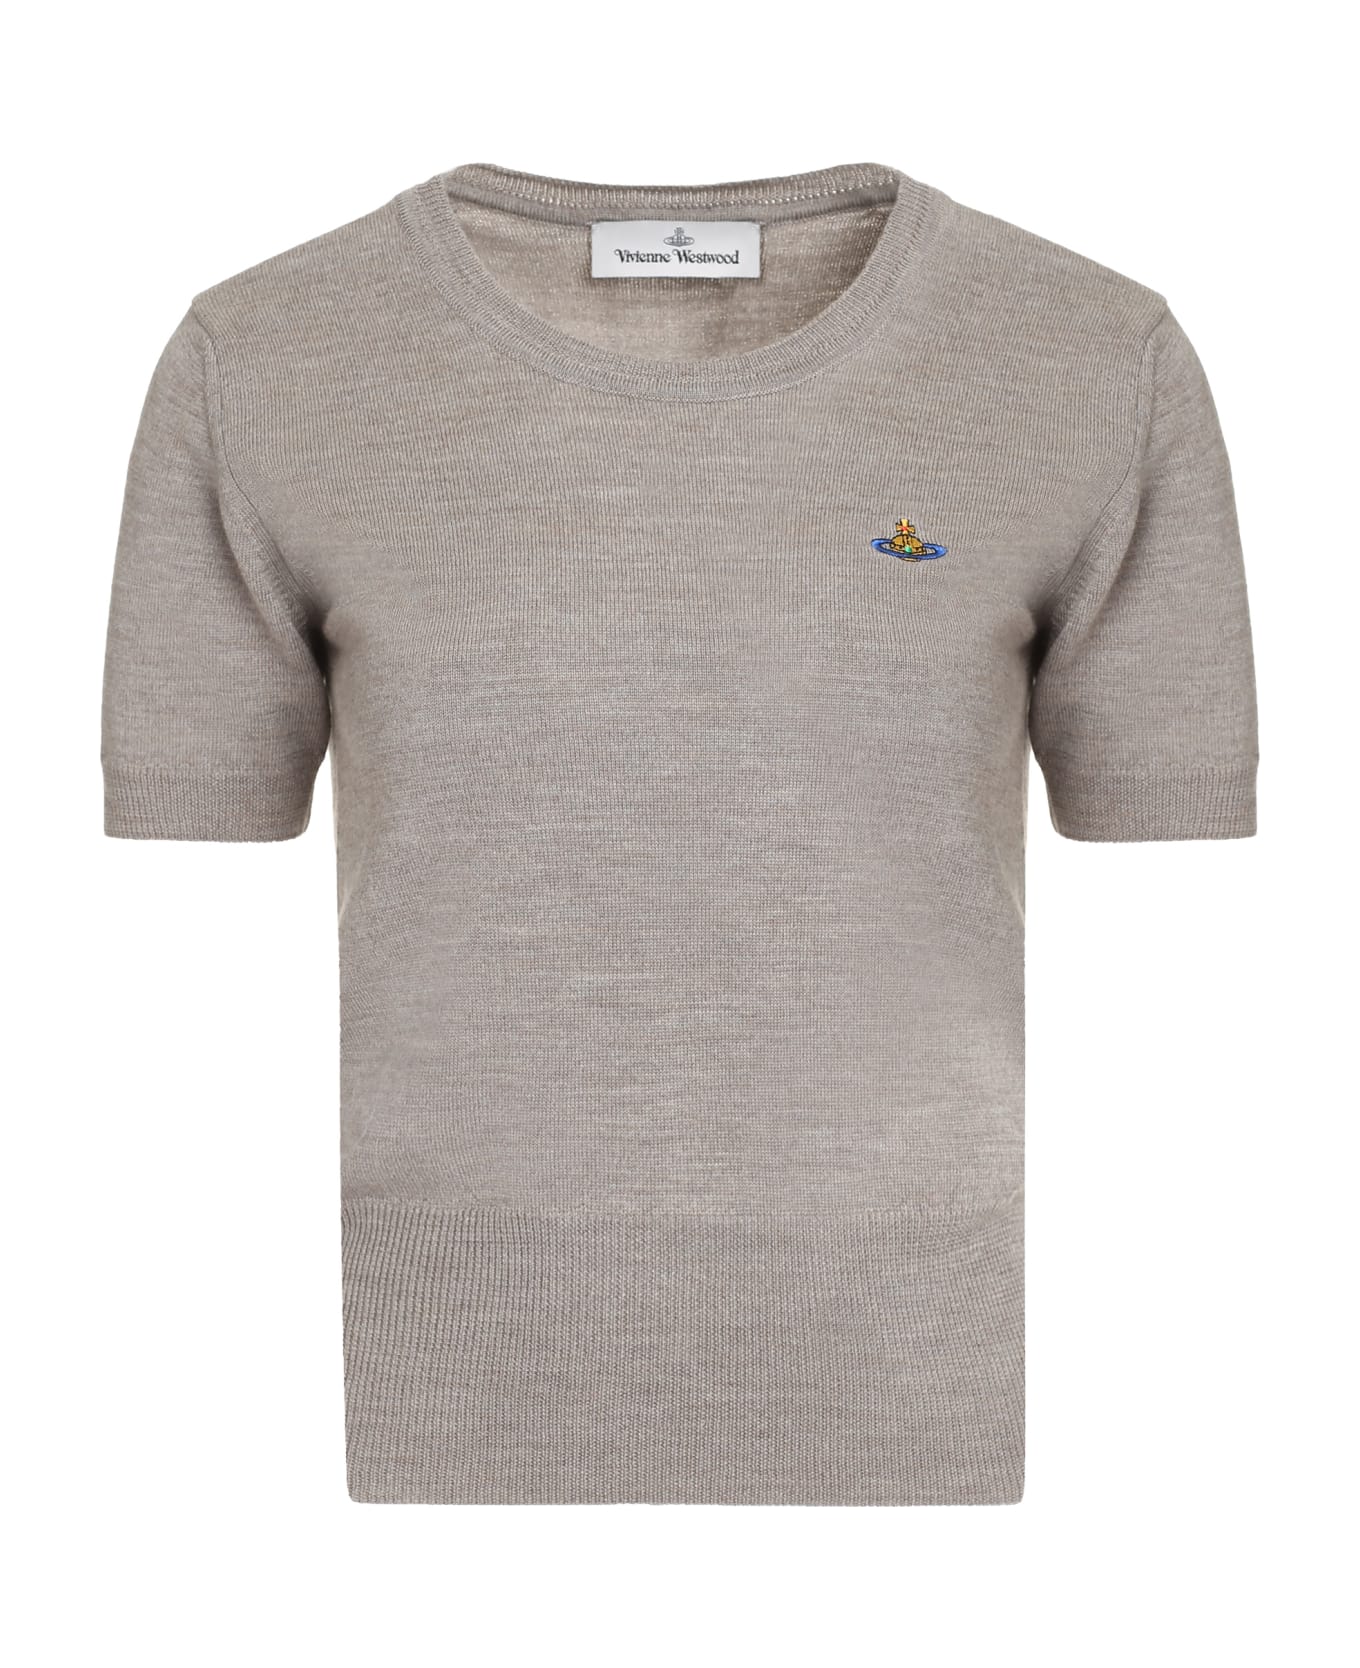 Vivienne Westwood Bea Logo Knitted T-shirt - turtledove